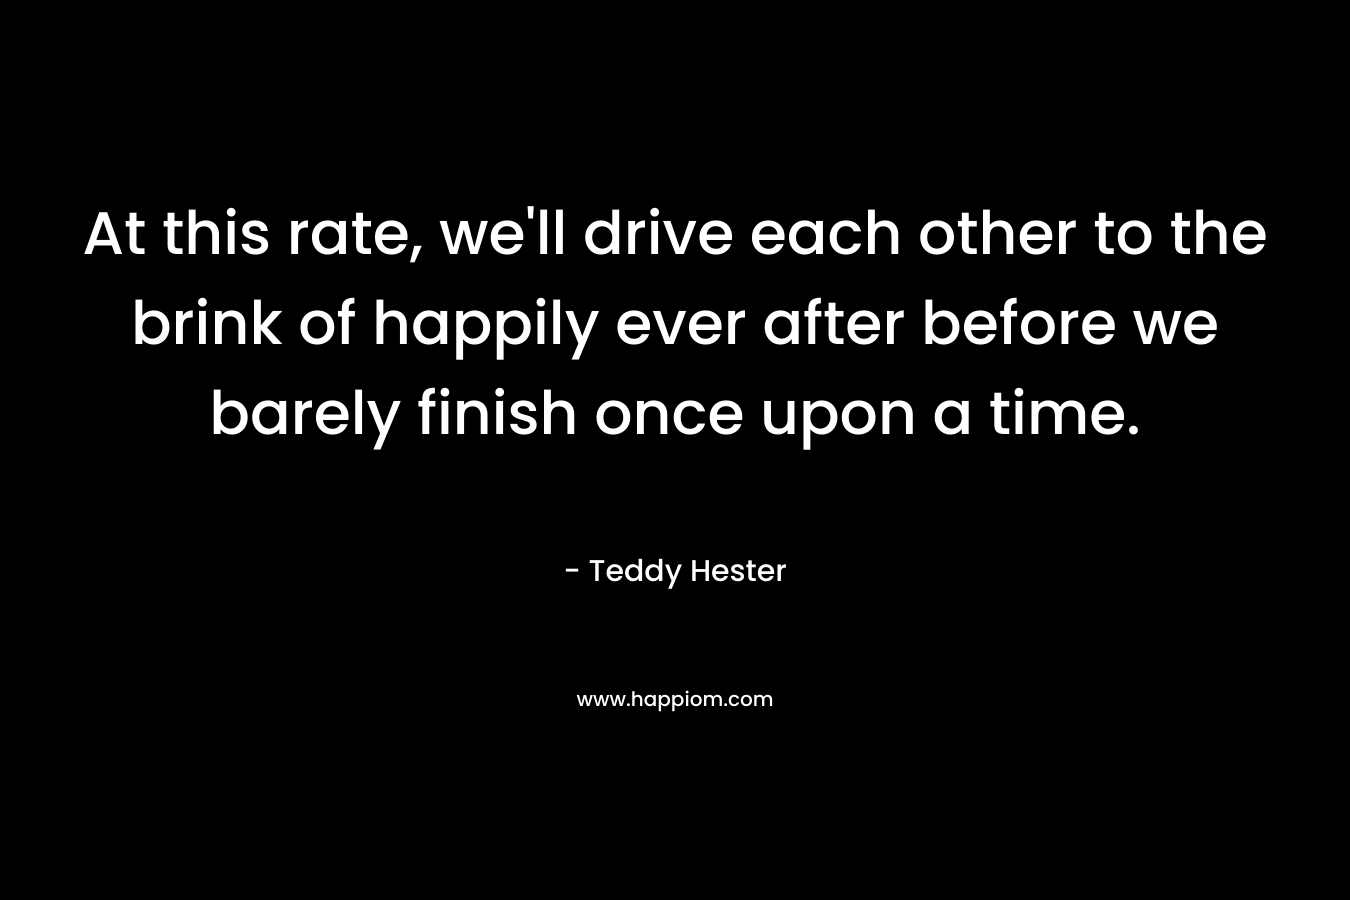 At this rate, we'll drive each other to the brink of happily ever after before we barely finish once upon a time.